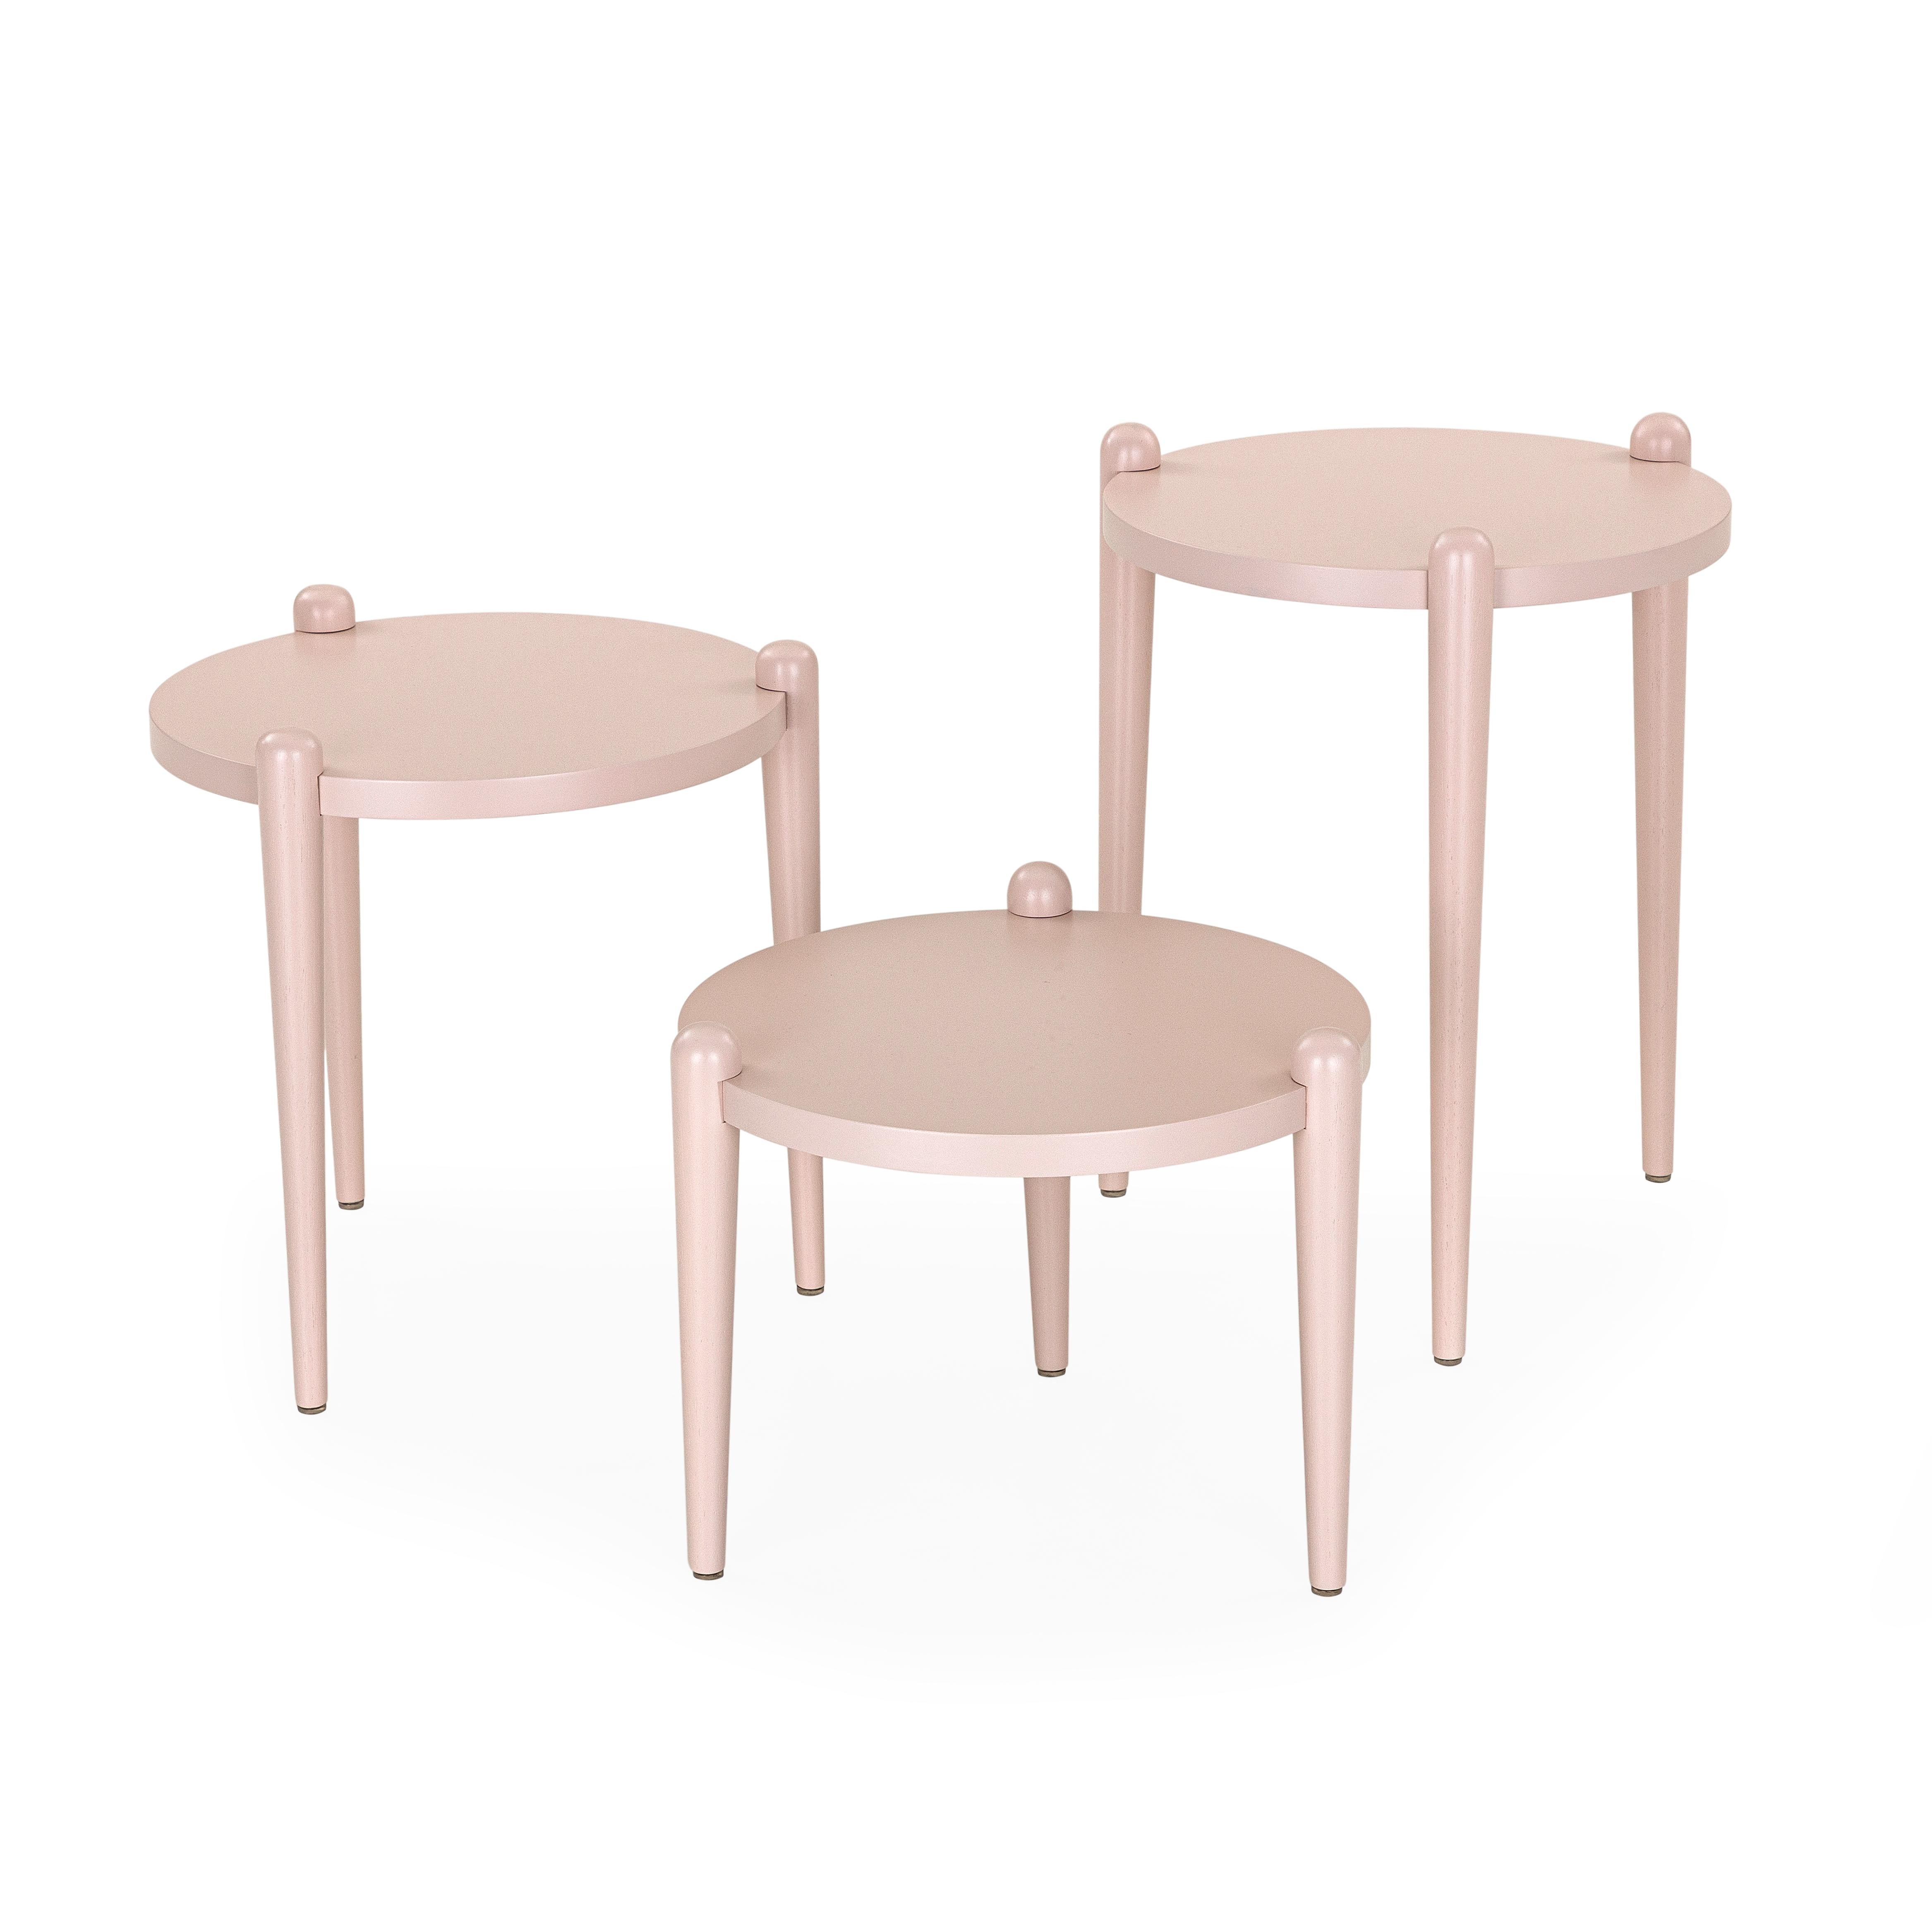 Pan Contemporary Side Tables in Light Pink Quartz Finish, Set of 3 For Sale 2